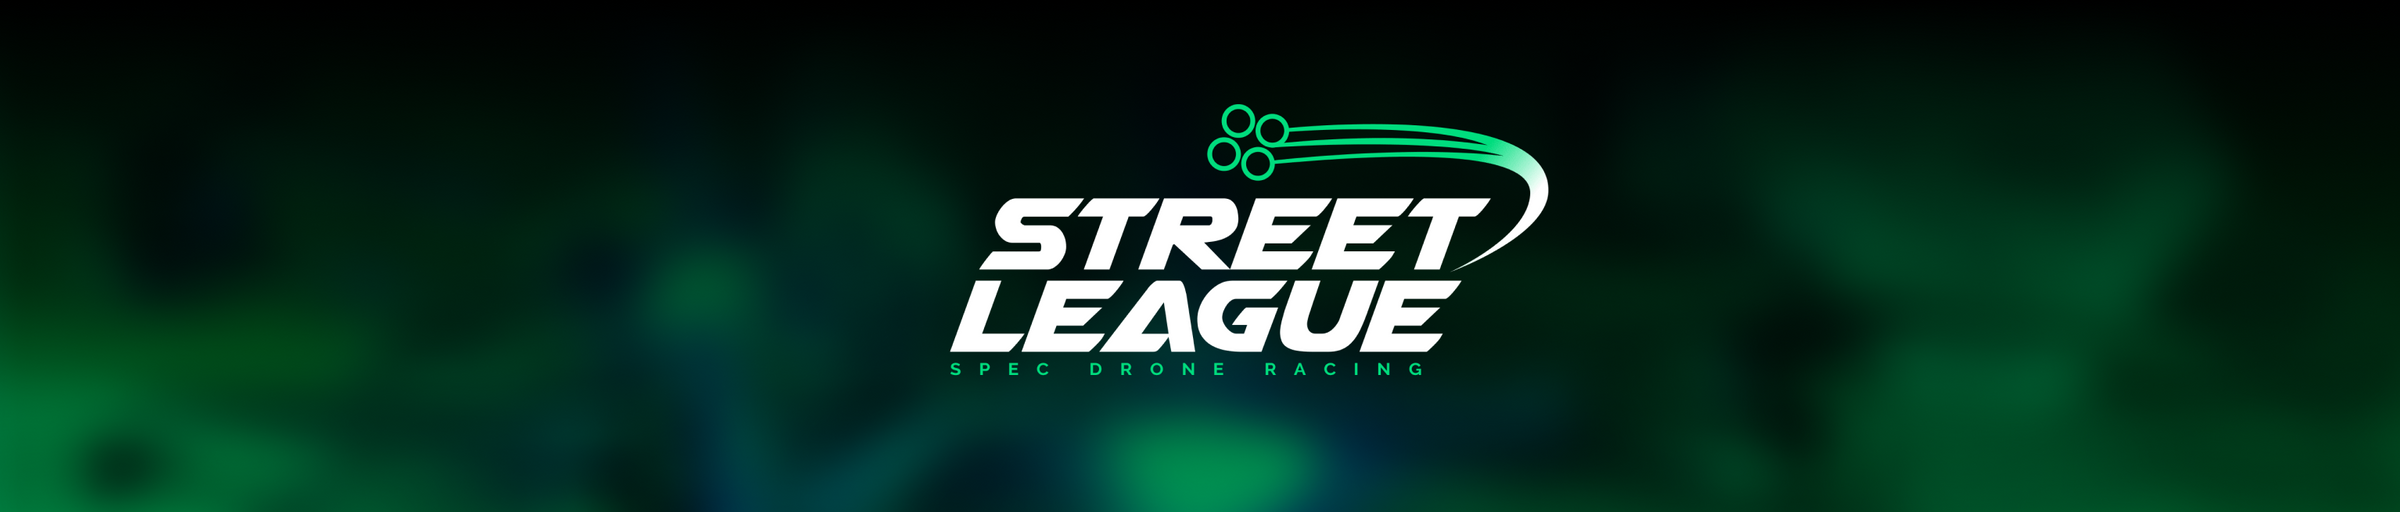 Street League Spec Drone Racing, Drones, Frames, Parts and More!